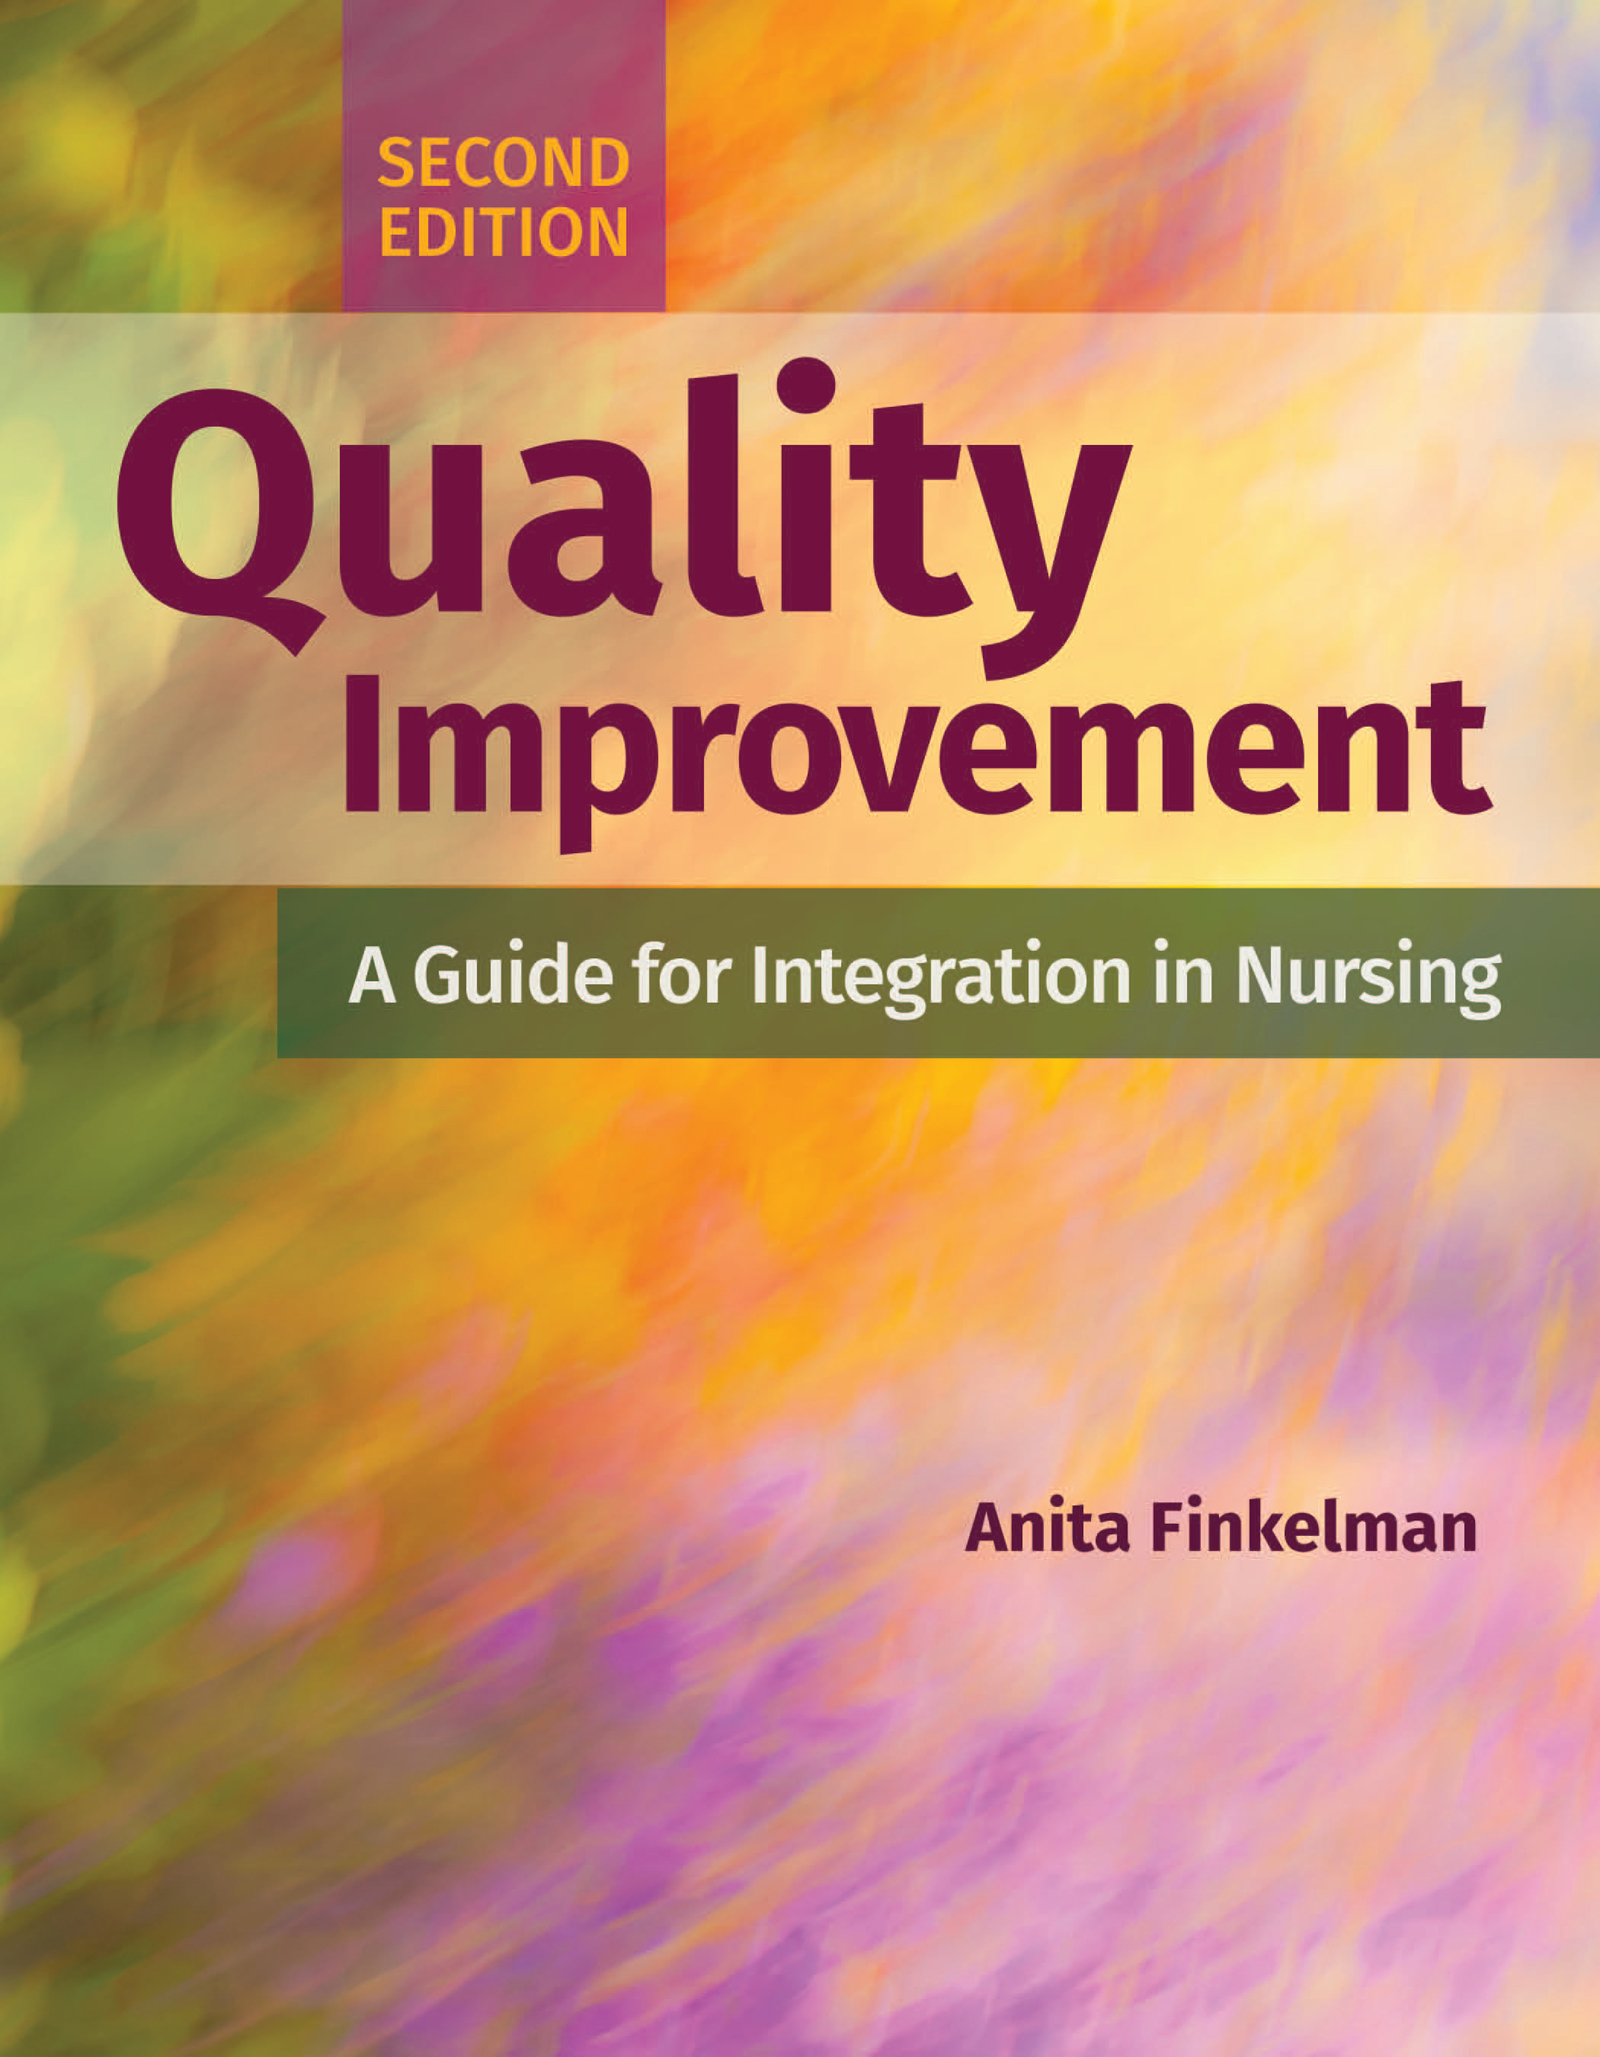 SECOND EDITION Quality Improvement A Guide for Integration in Nursing - photo 1